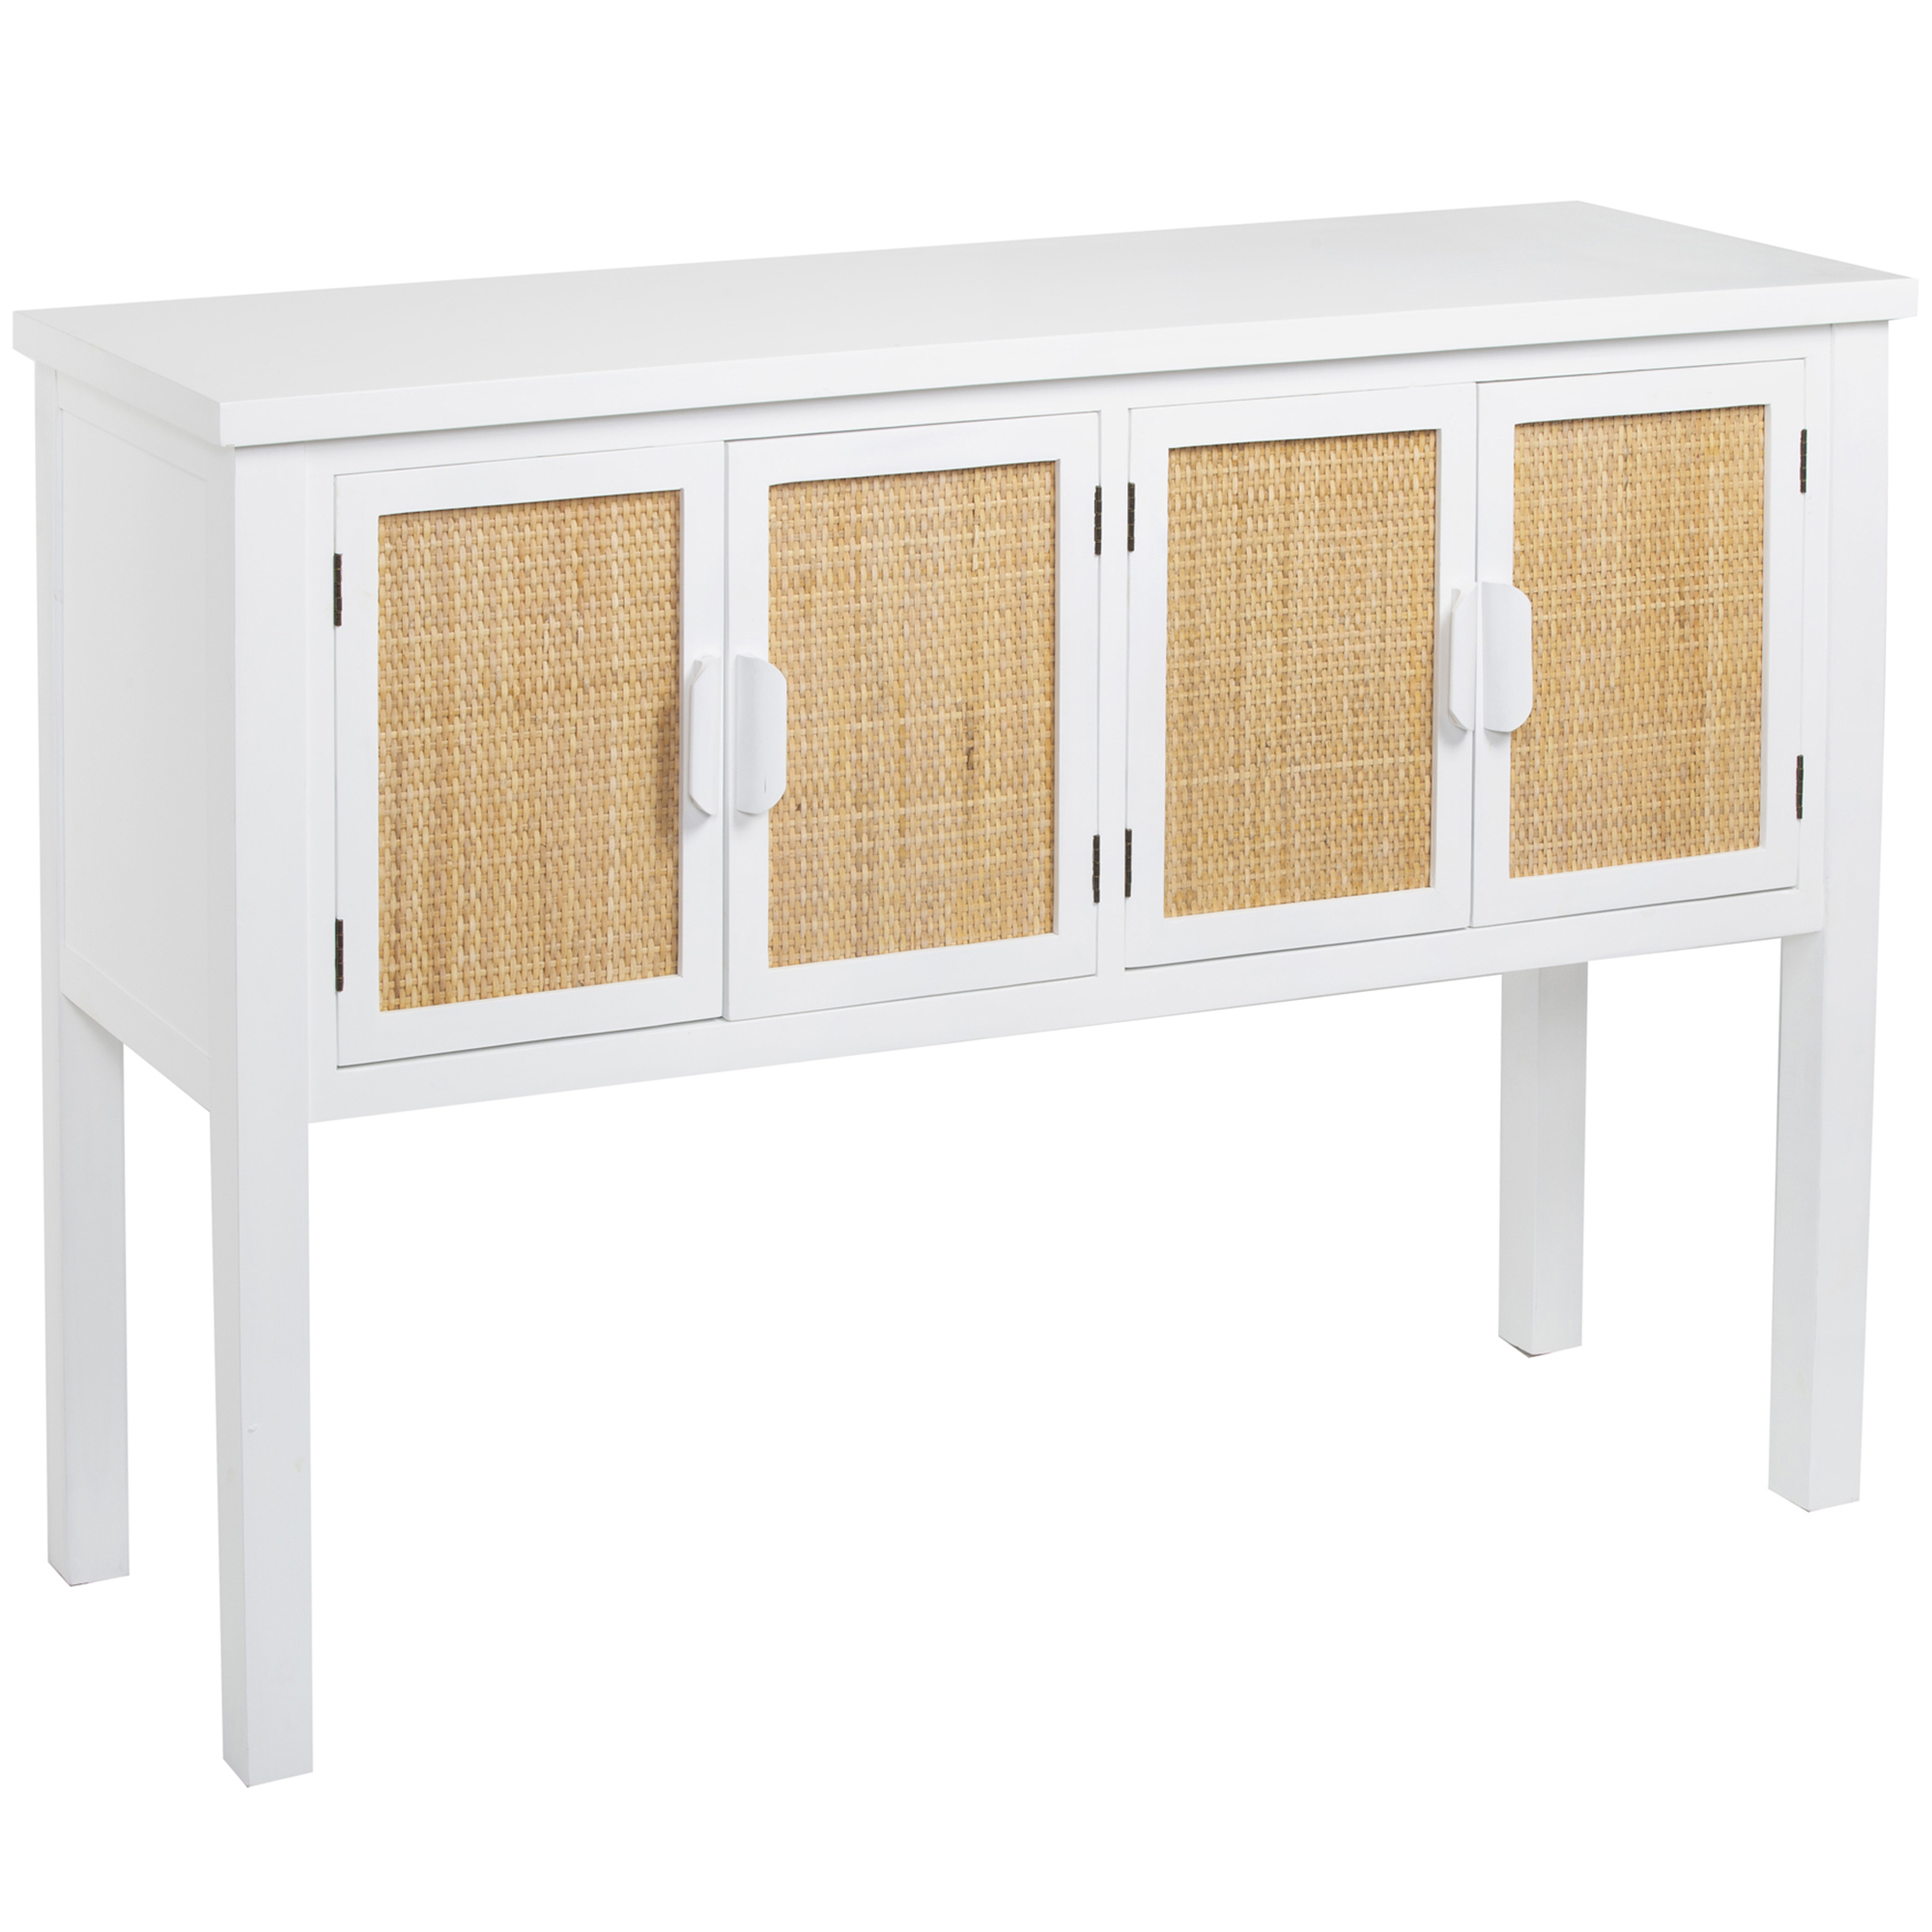 New Mullen Rattan Console Table With Cabinets Ebay